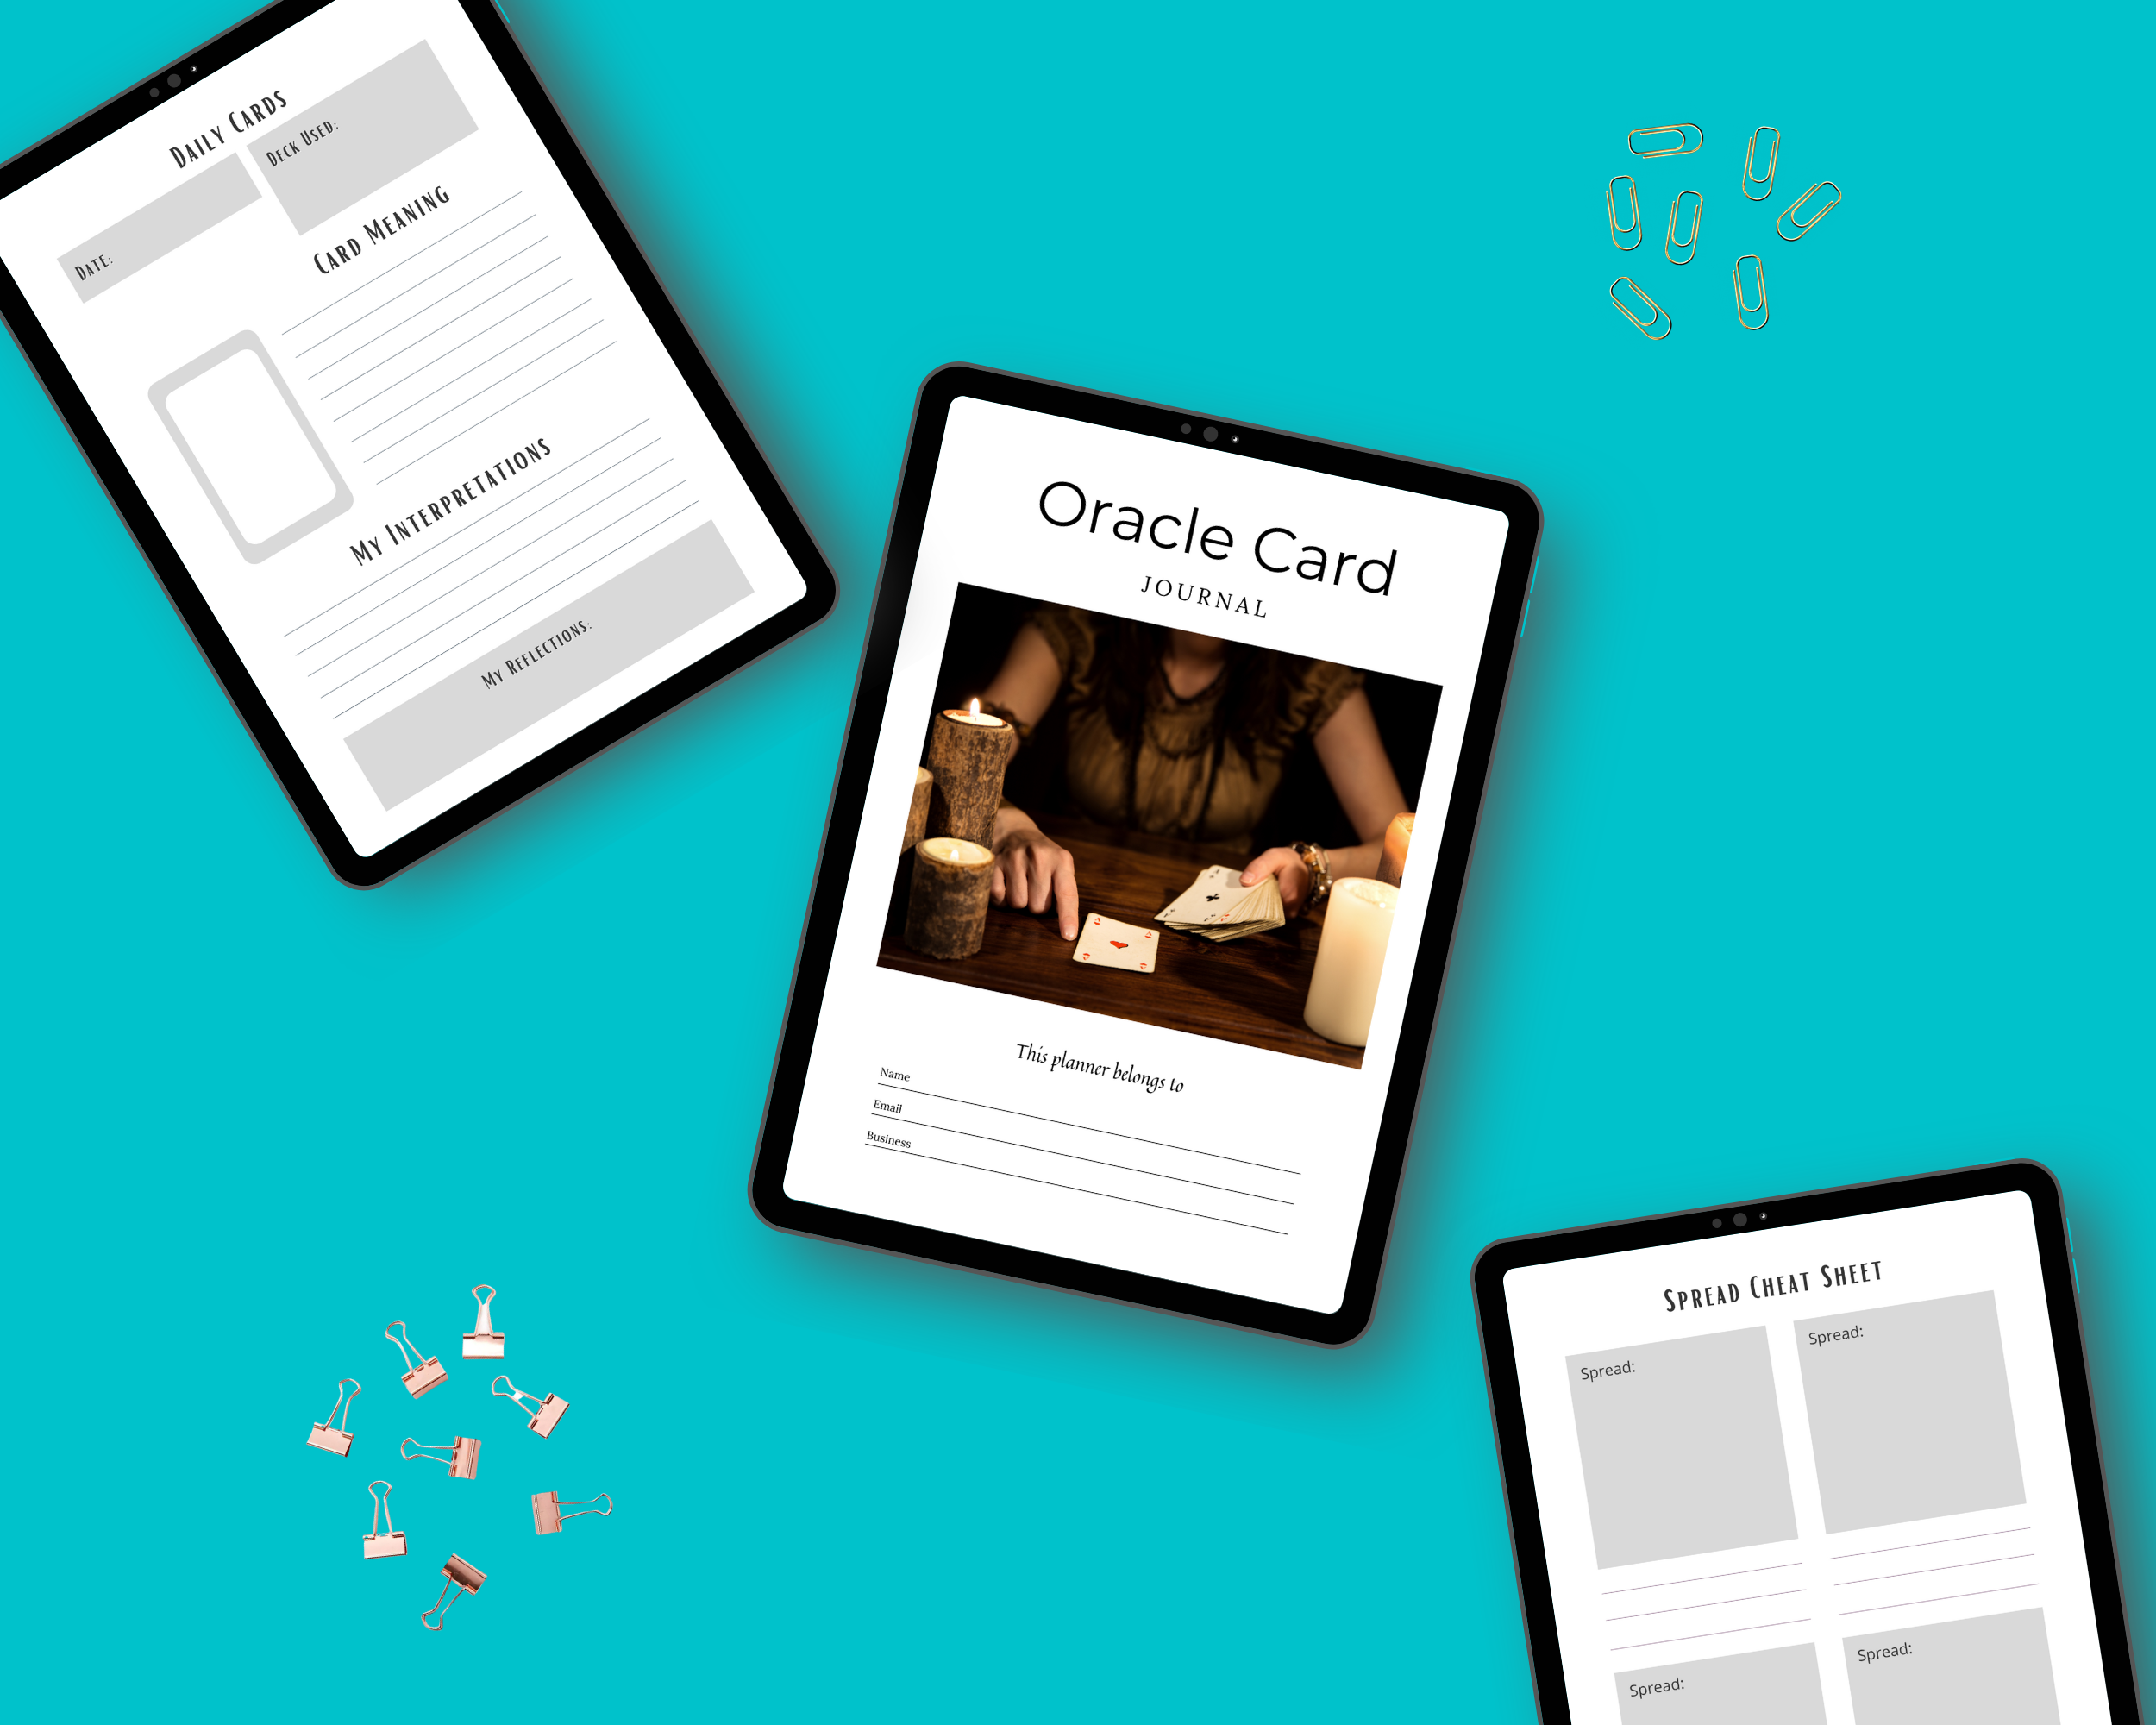 Editable Oracle Card Journal Templates in Canva | Commercial Use